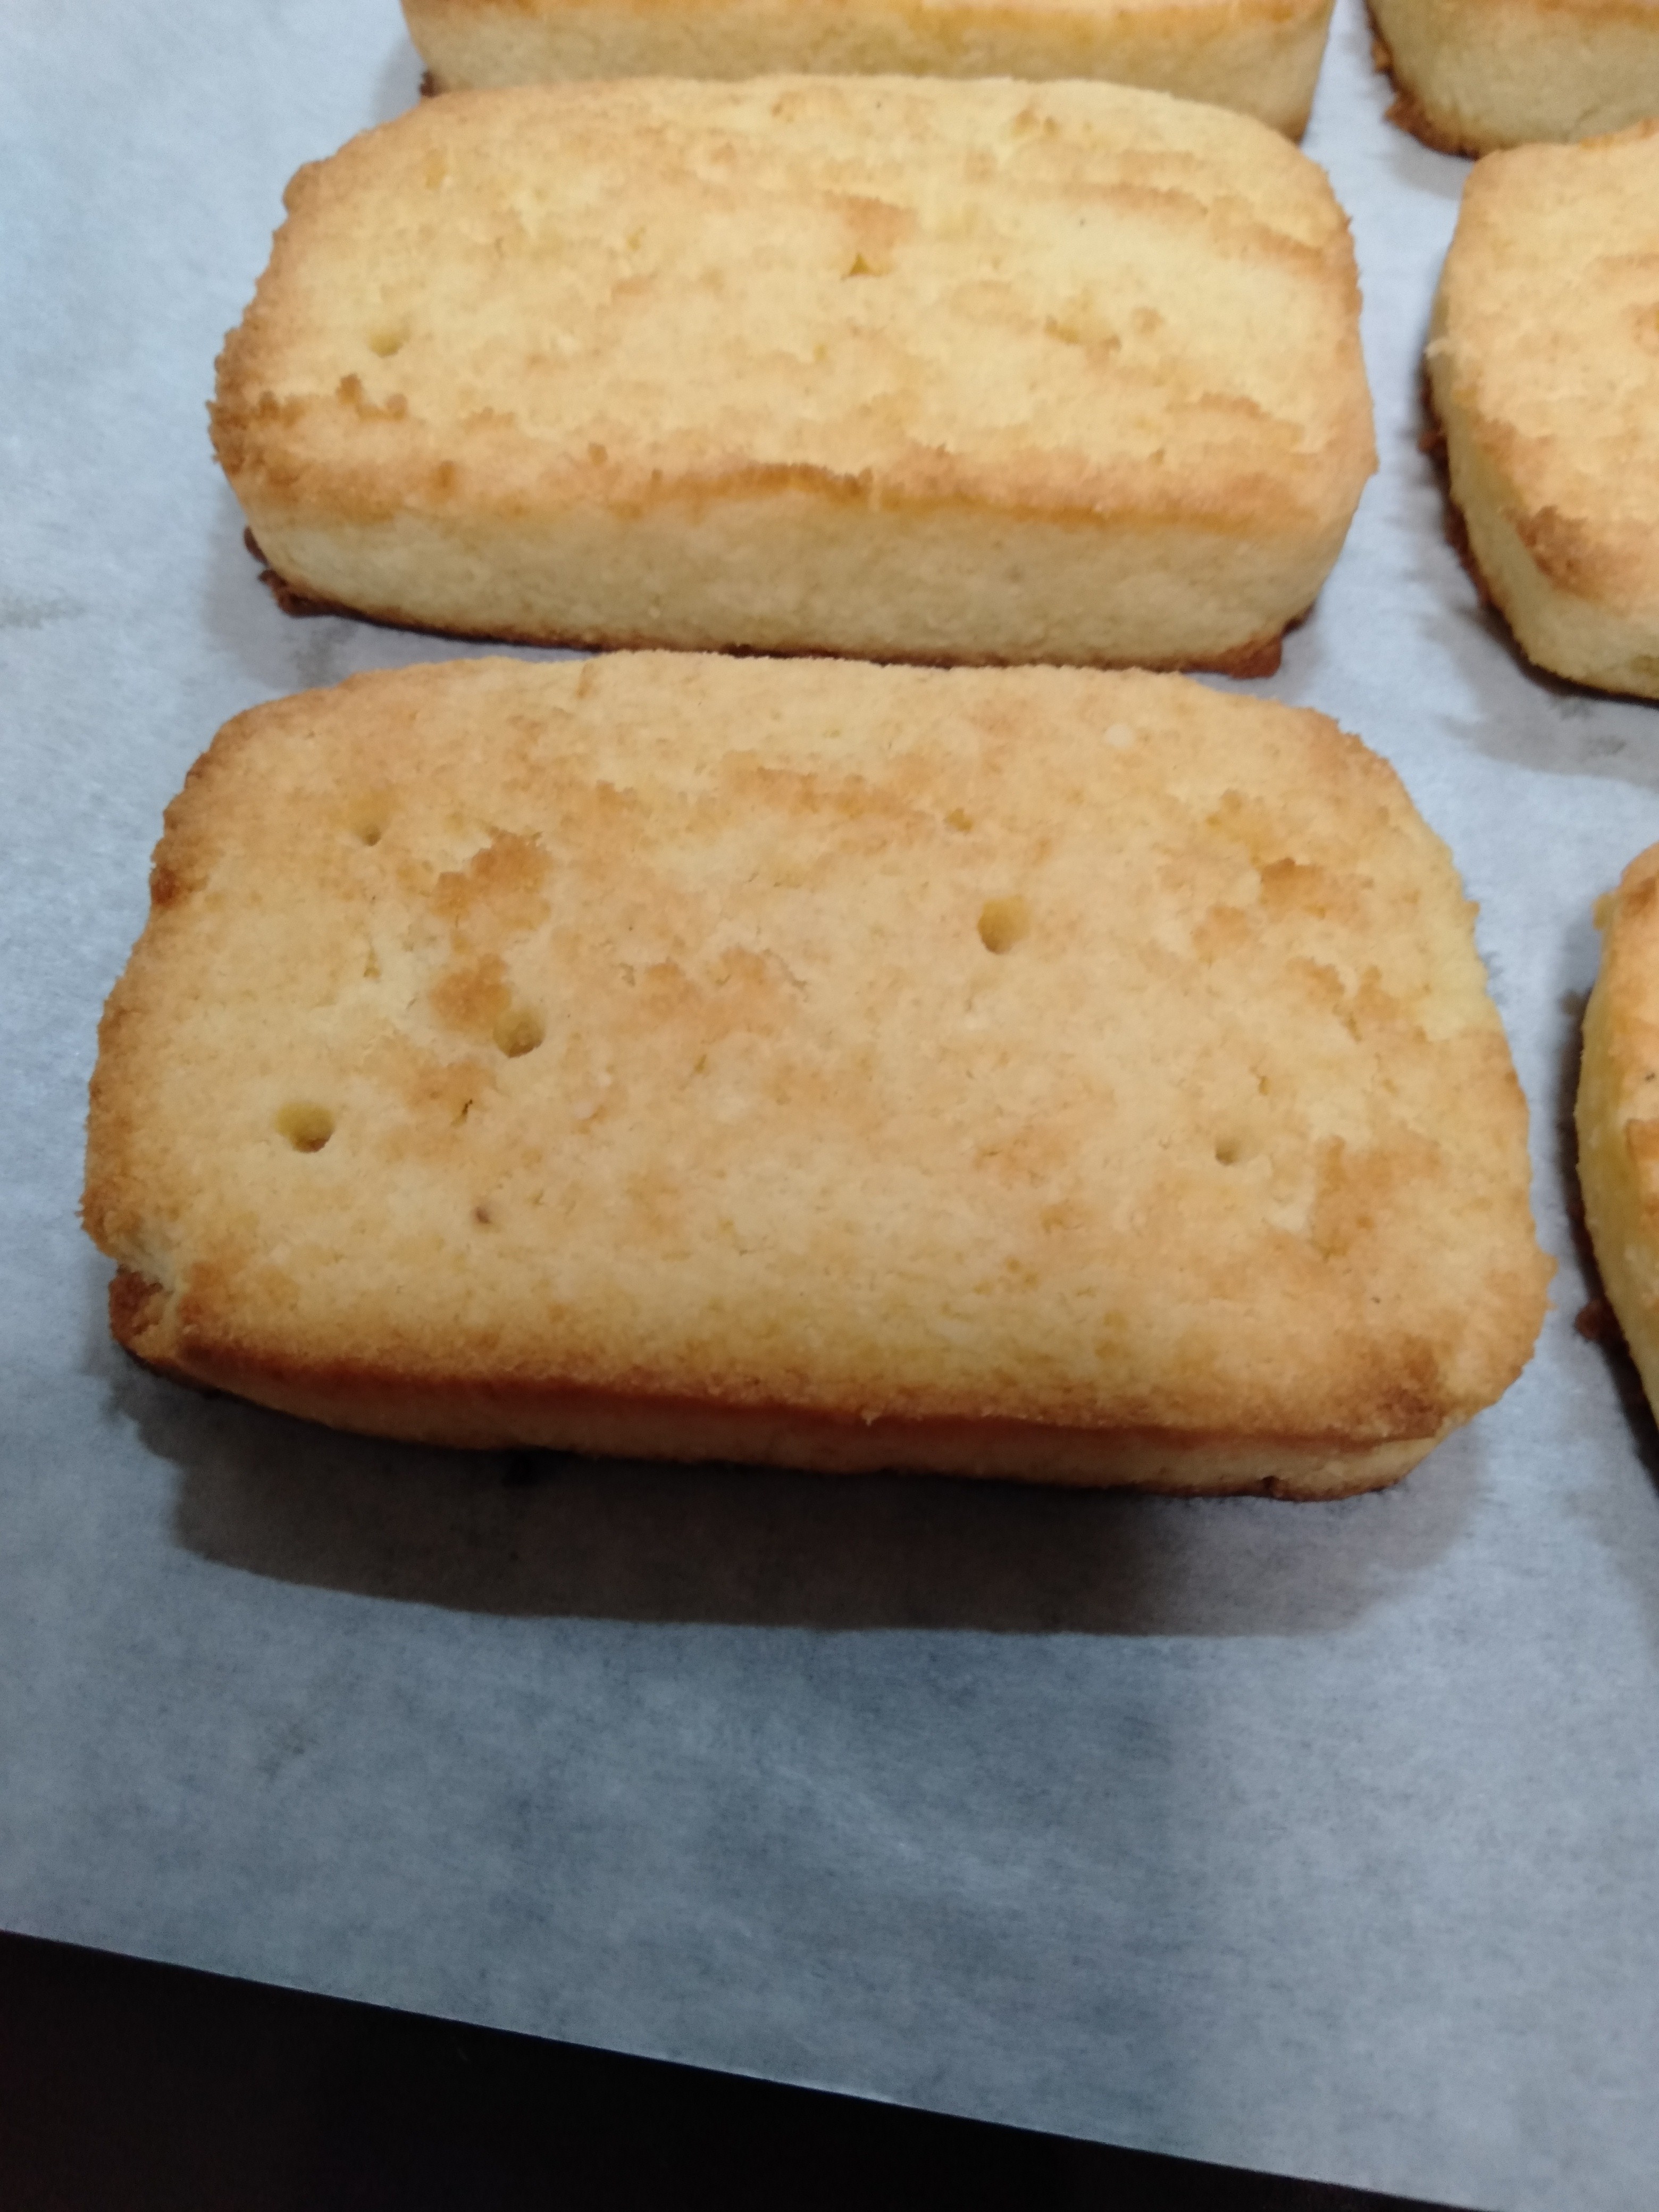 Keto Shortbread Cookies | Phillip Hargreaves | Copy Me That